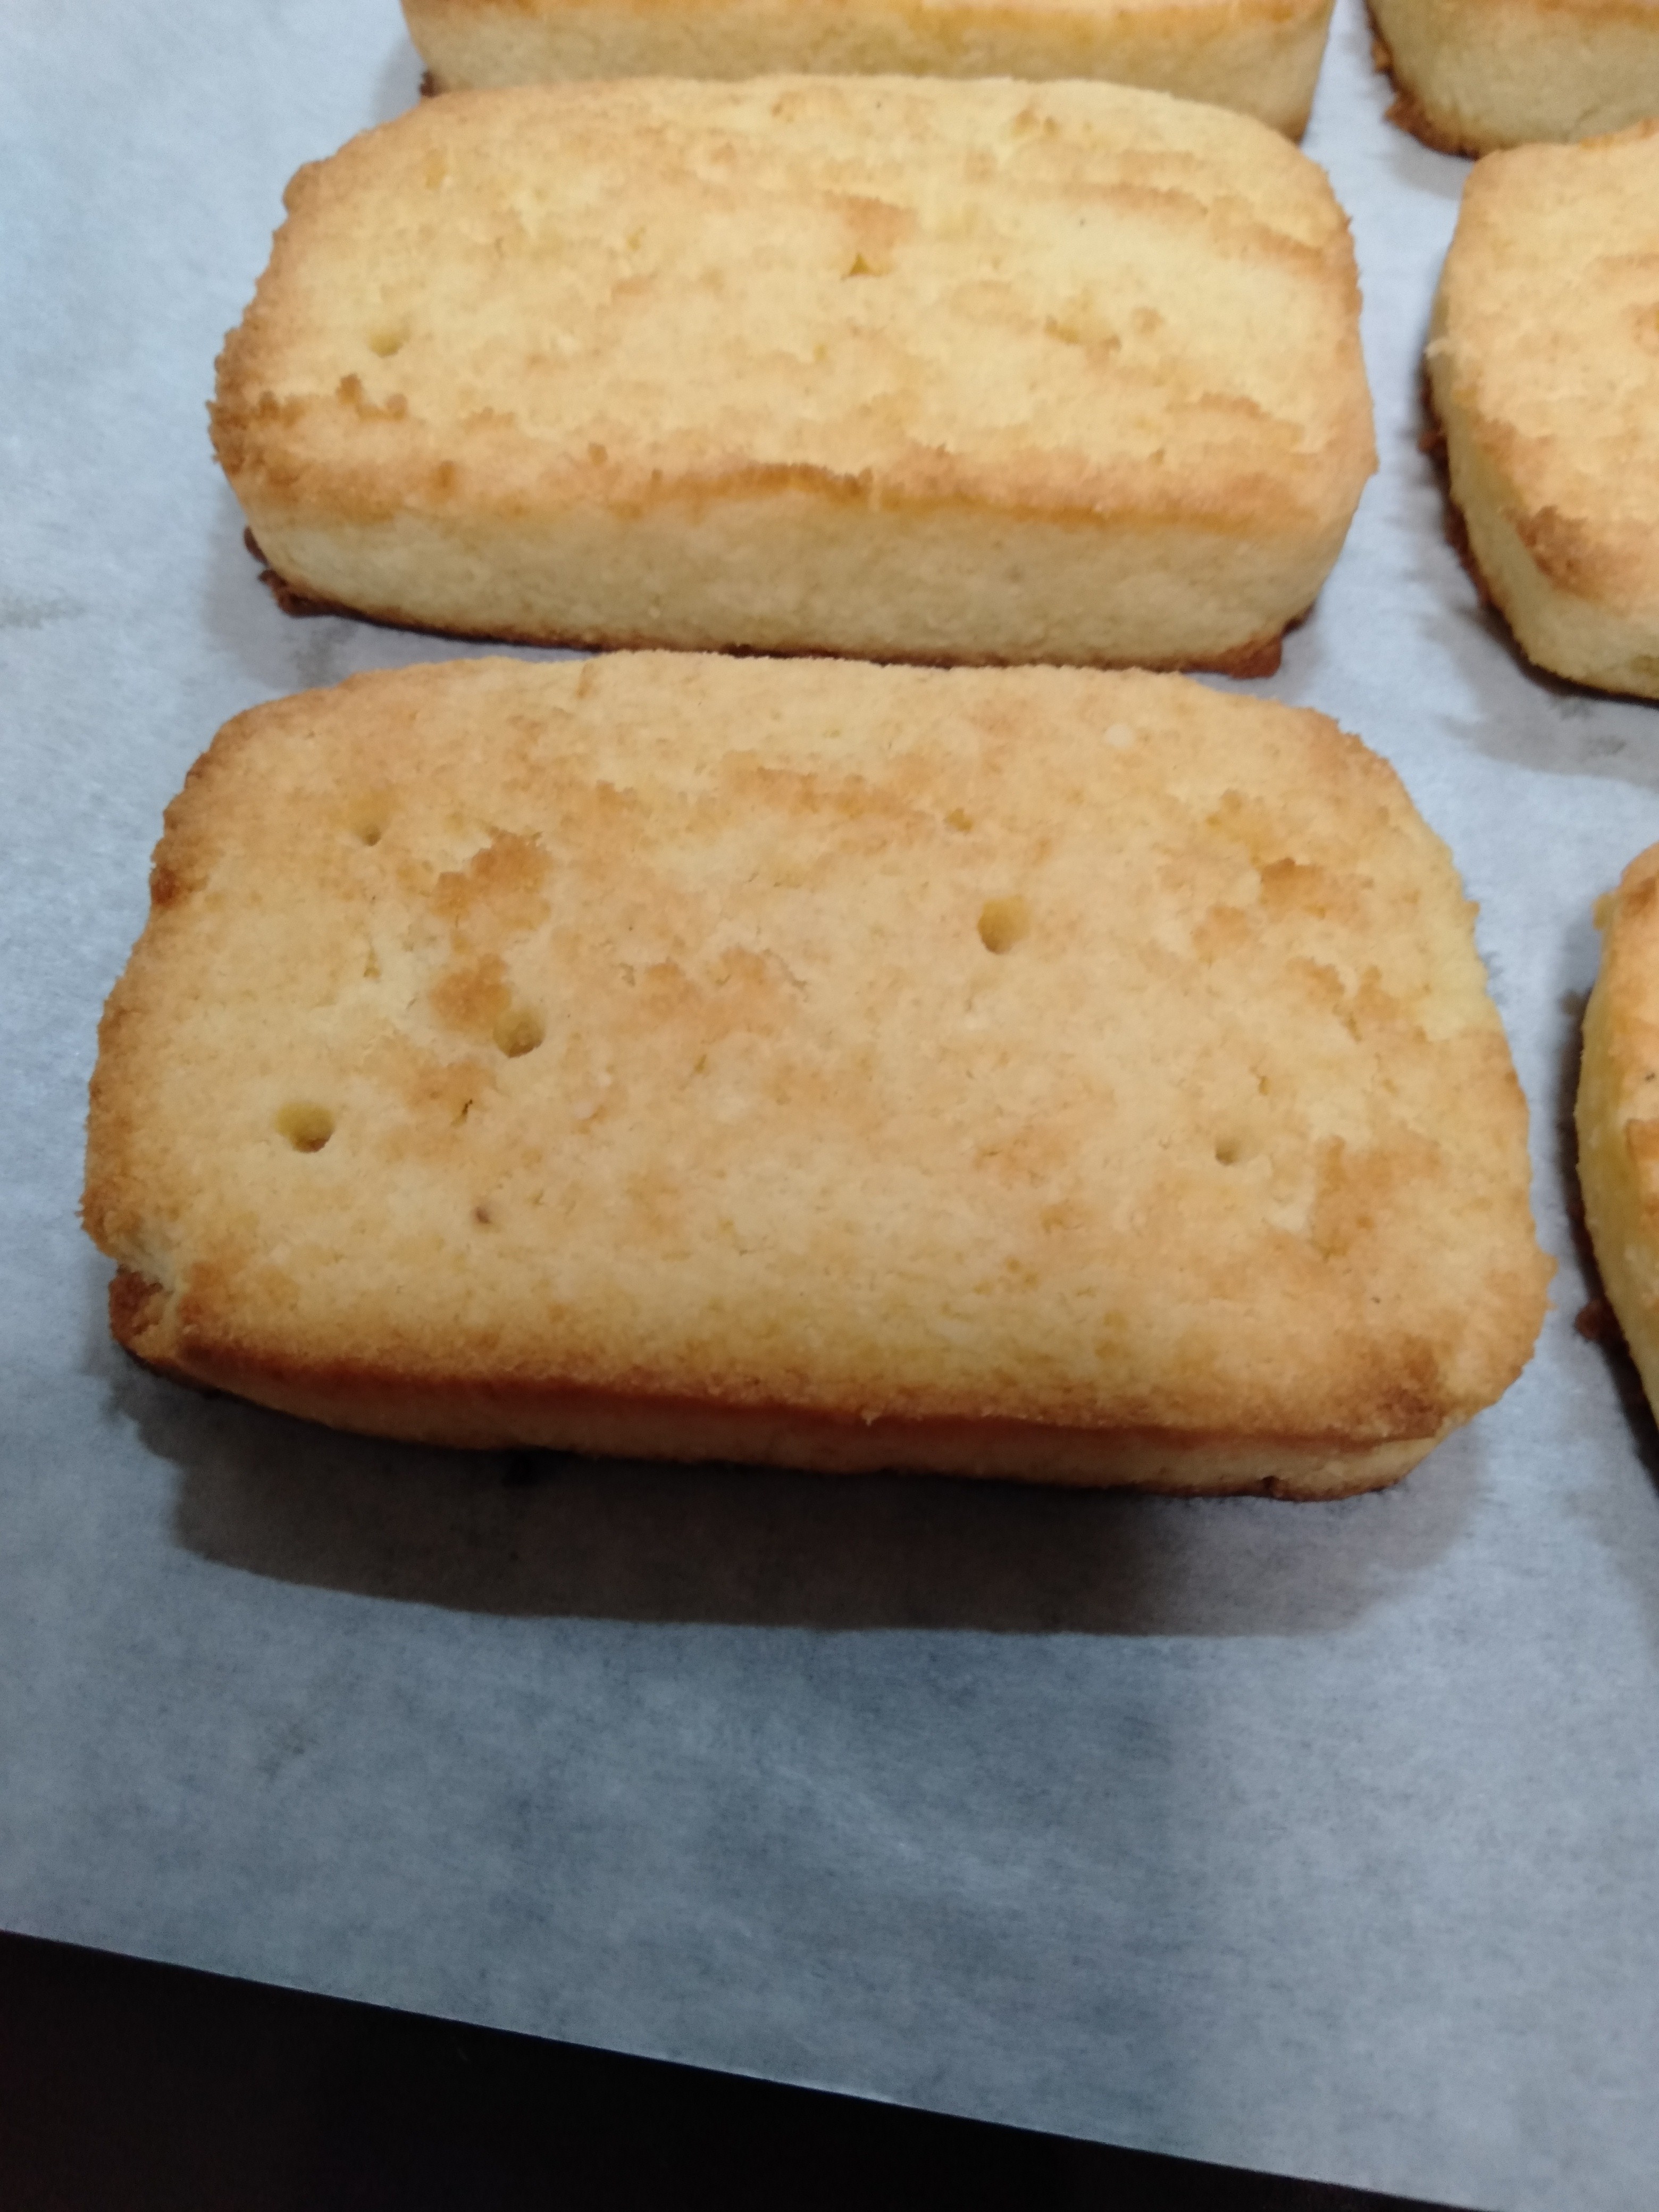 Keto Shortbread Cookies | Phillip Hargreaves | Copy Me That